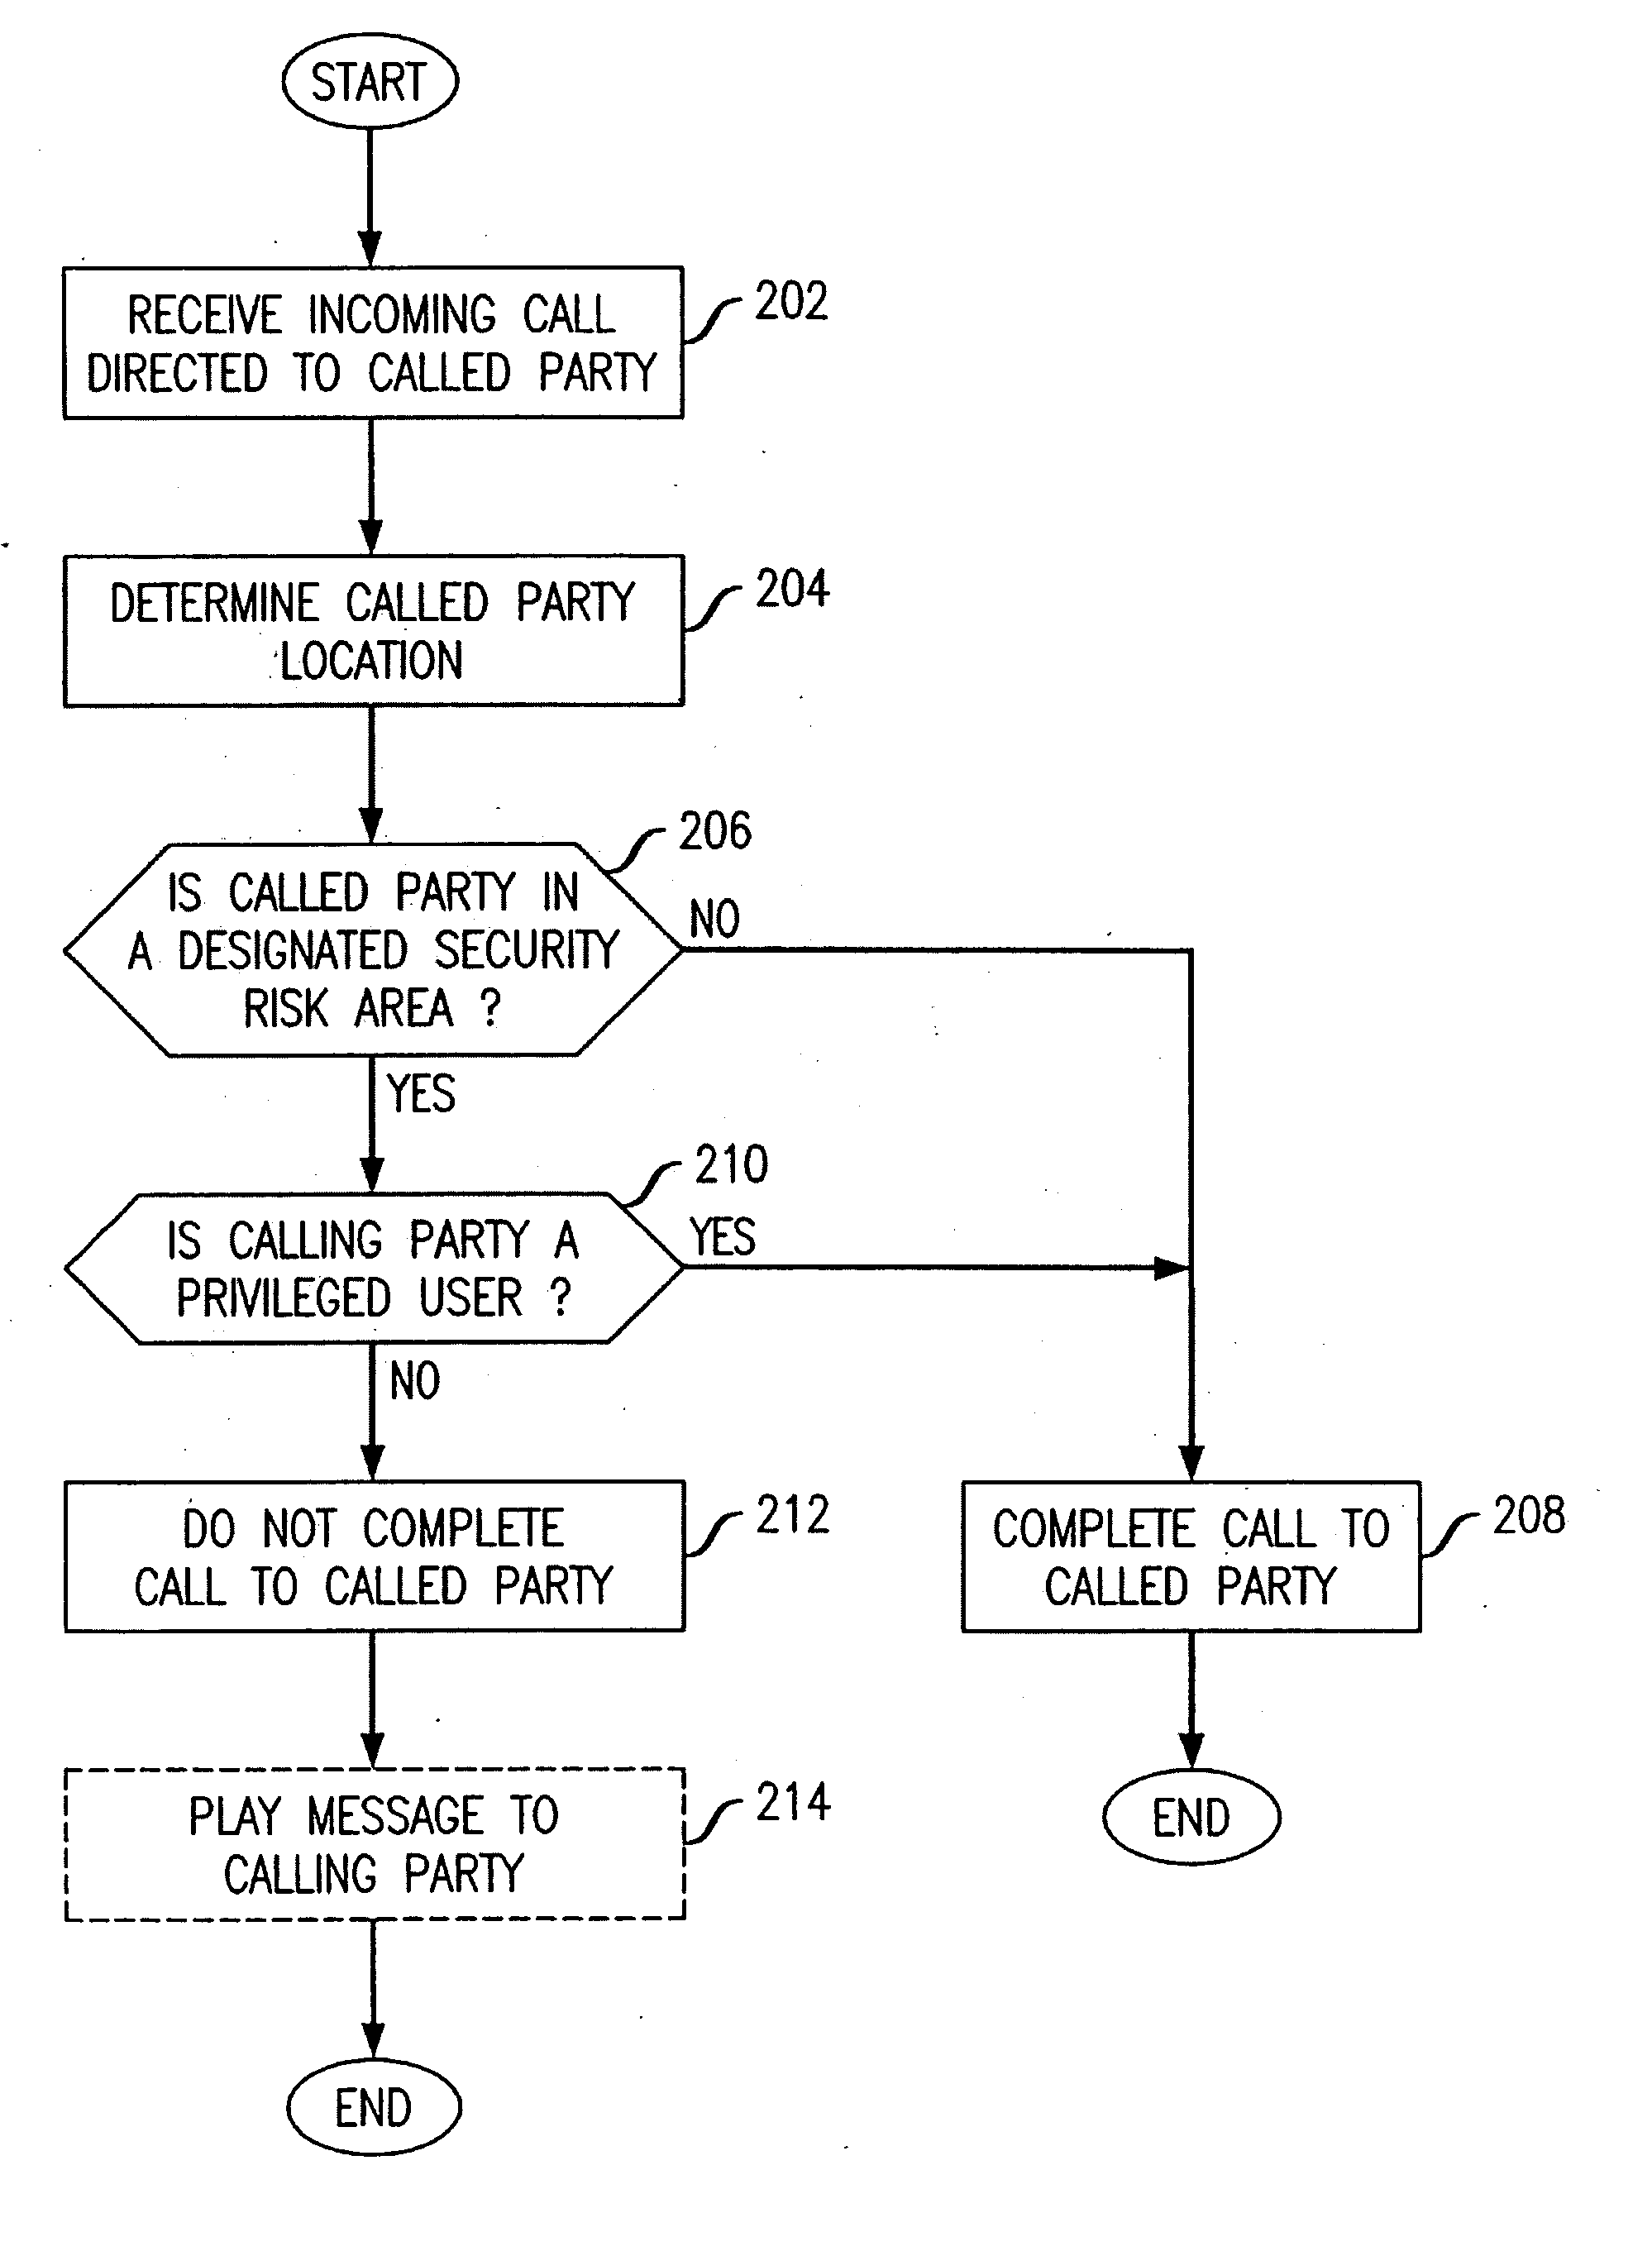 Network support for restricting call terminations in a security risk area